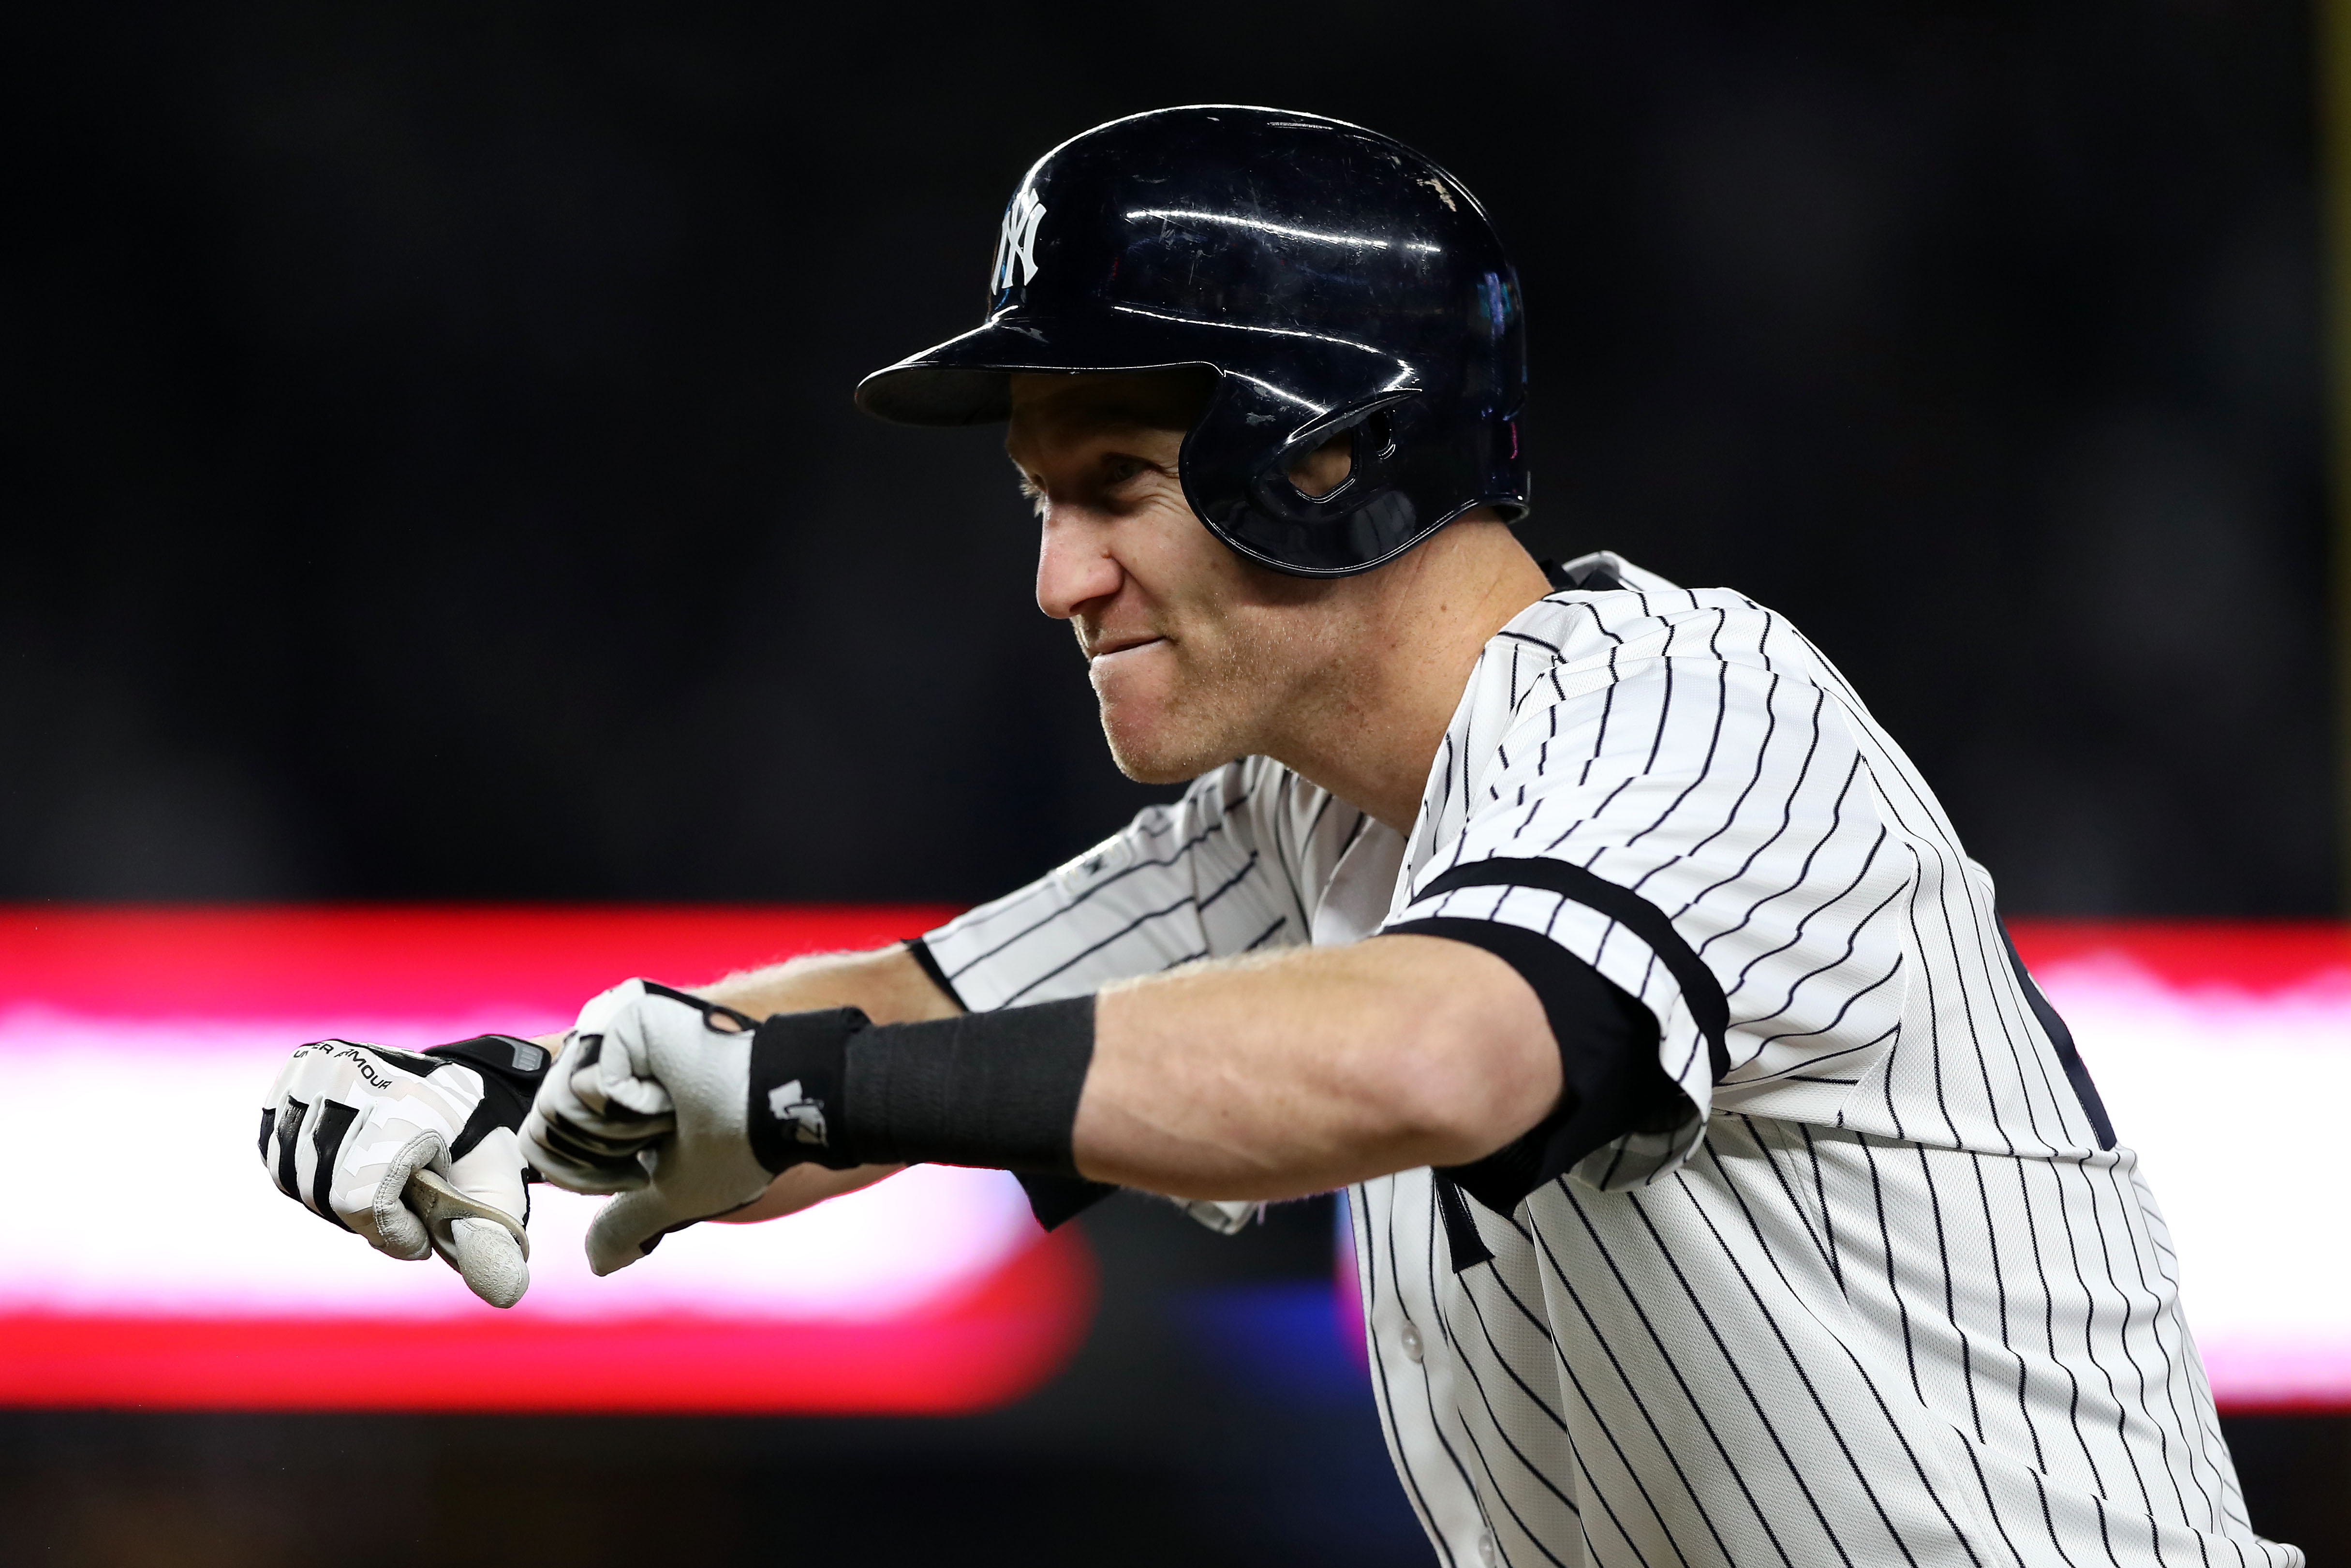 Which Yankees players have recorded 30+ SB in a season? MLB